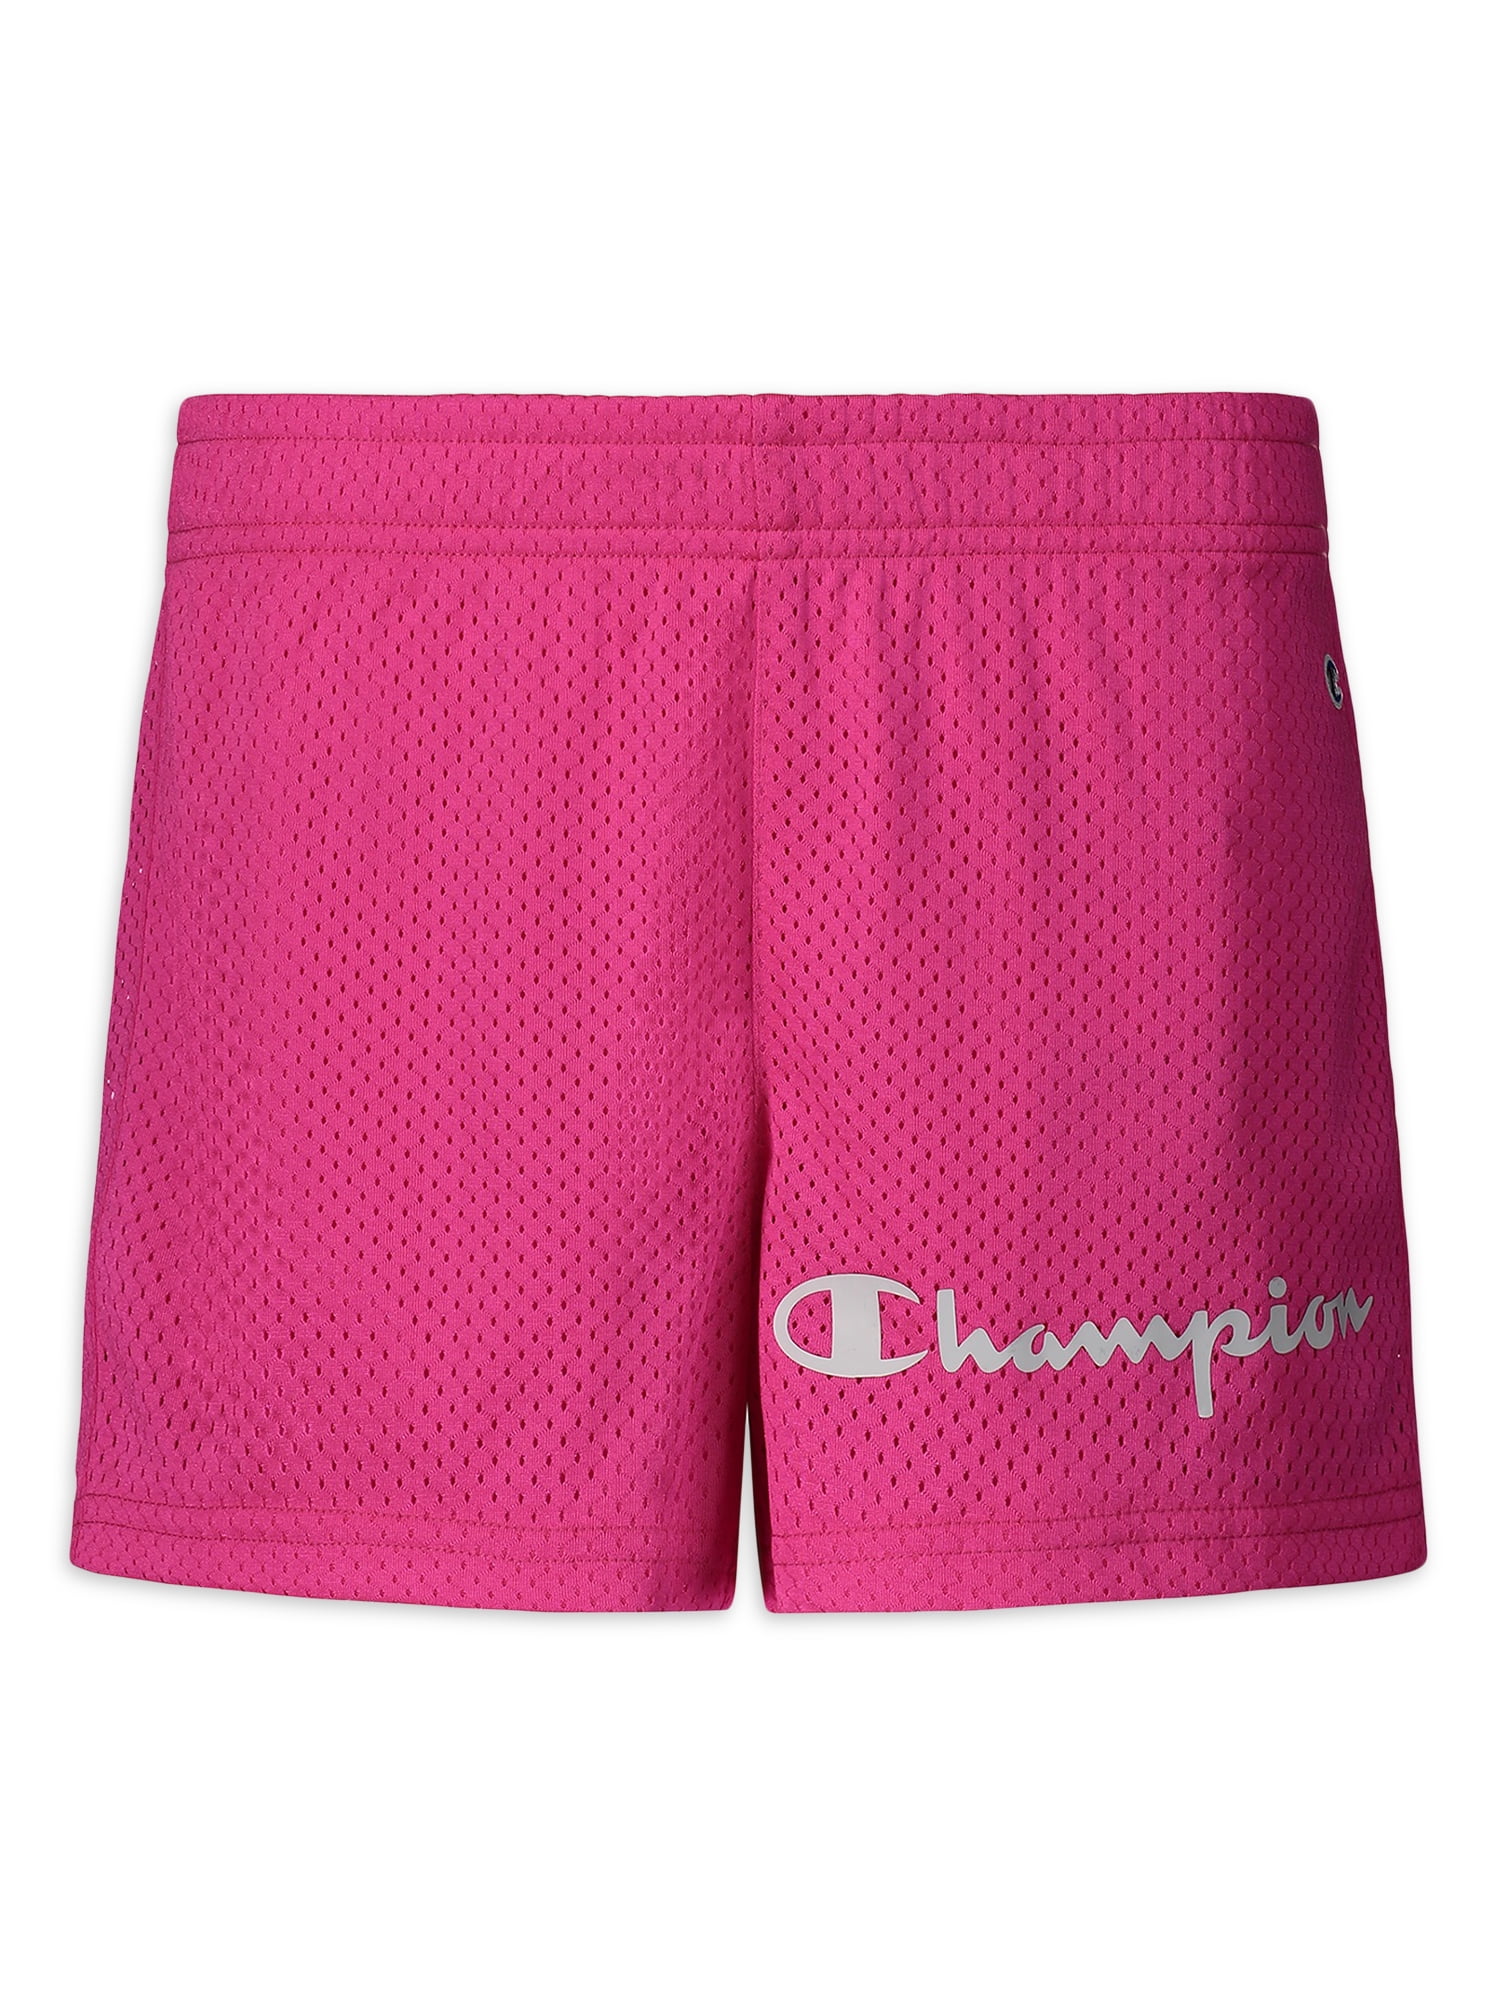 Champion Girls Woven and French Terry Basketball Shorts